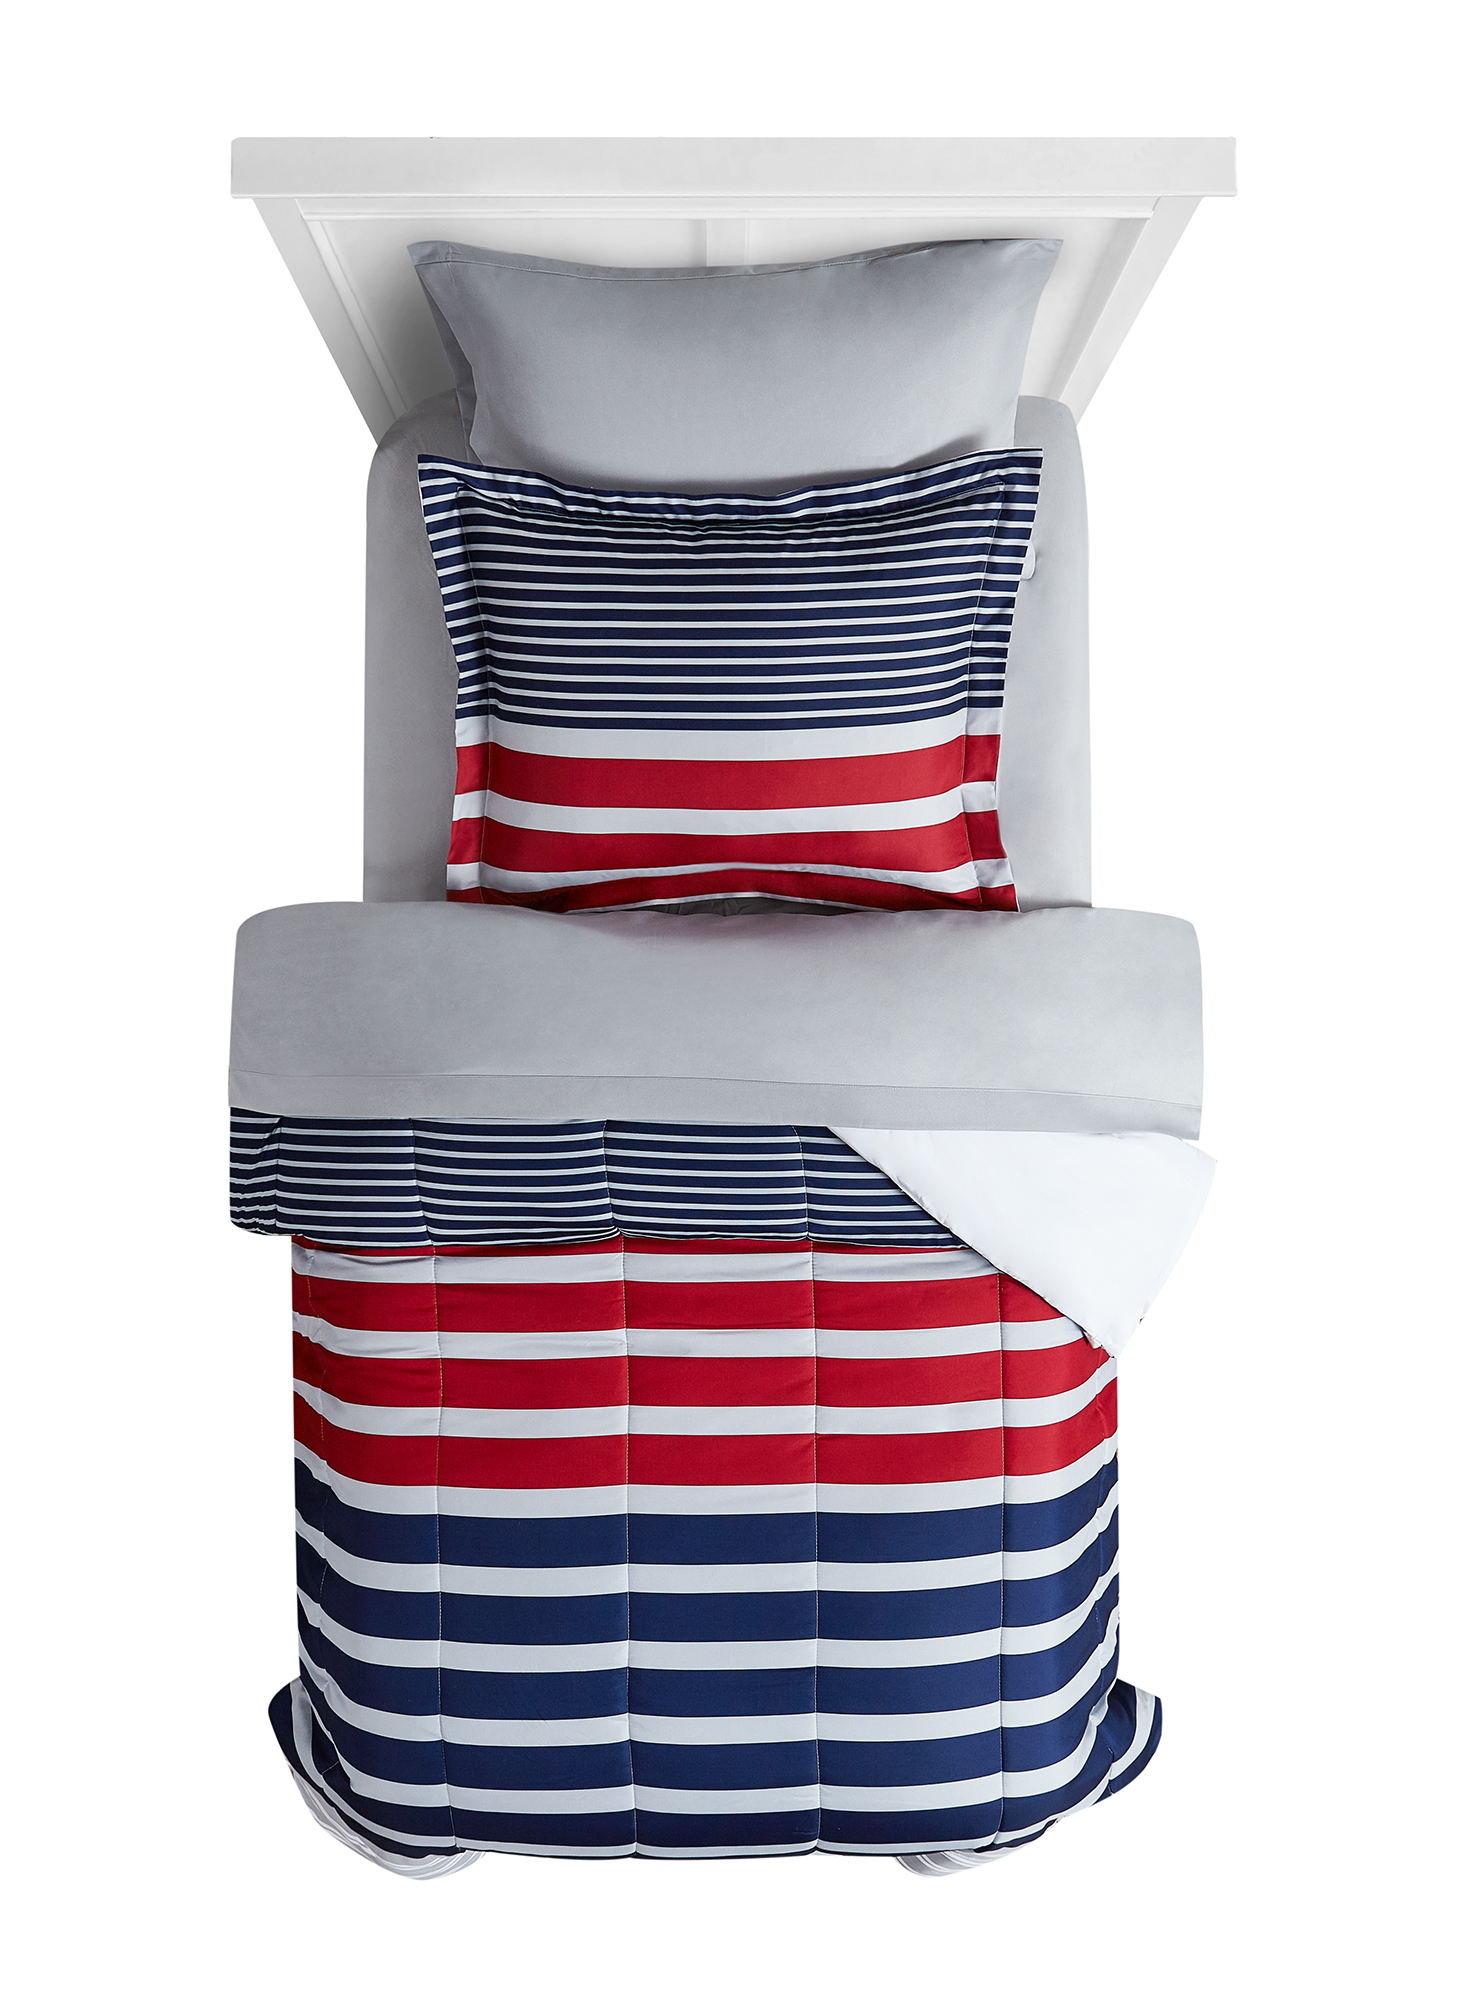 Mainstays Red and Blue Stripe 6 Piece Bed in a Bag Comforter Set with Sheets, Twin - image 4 of 9